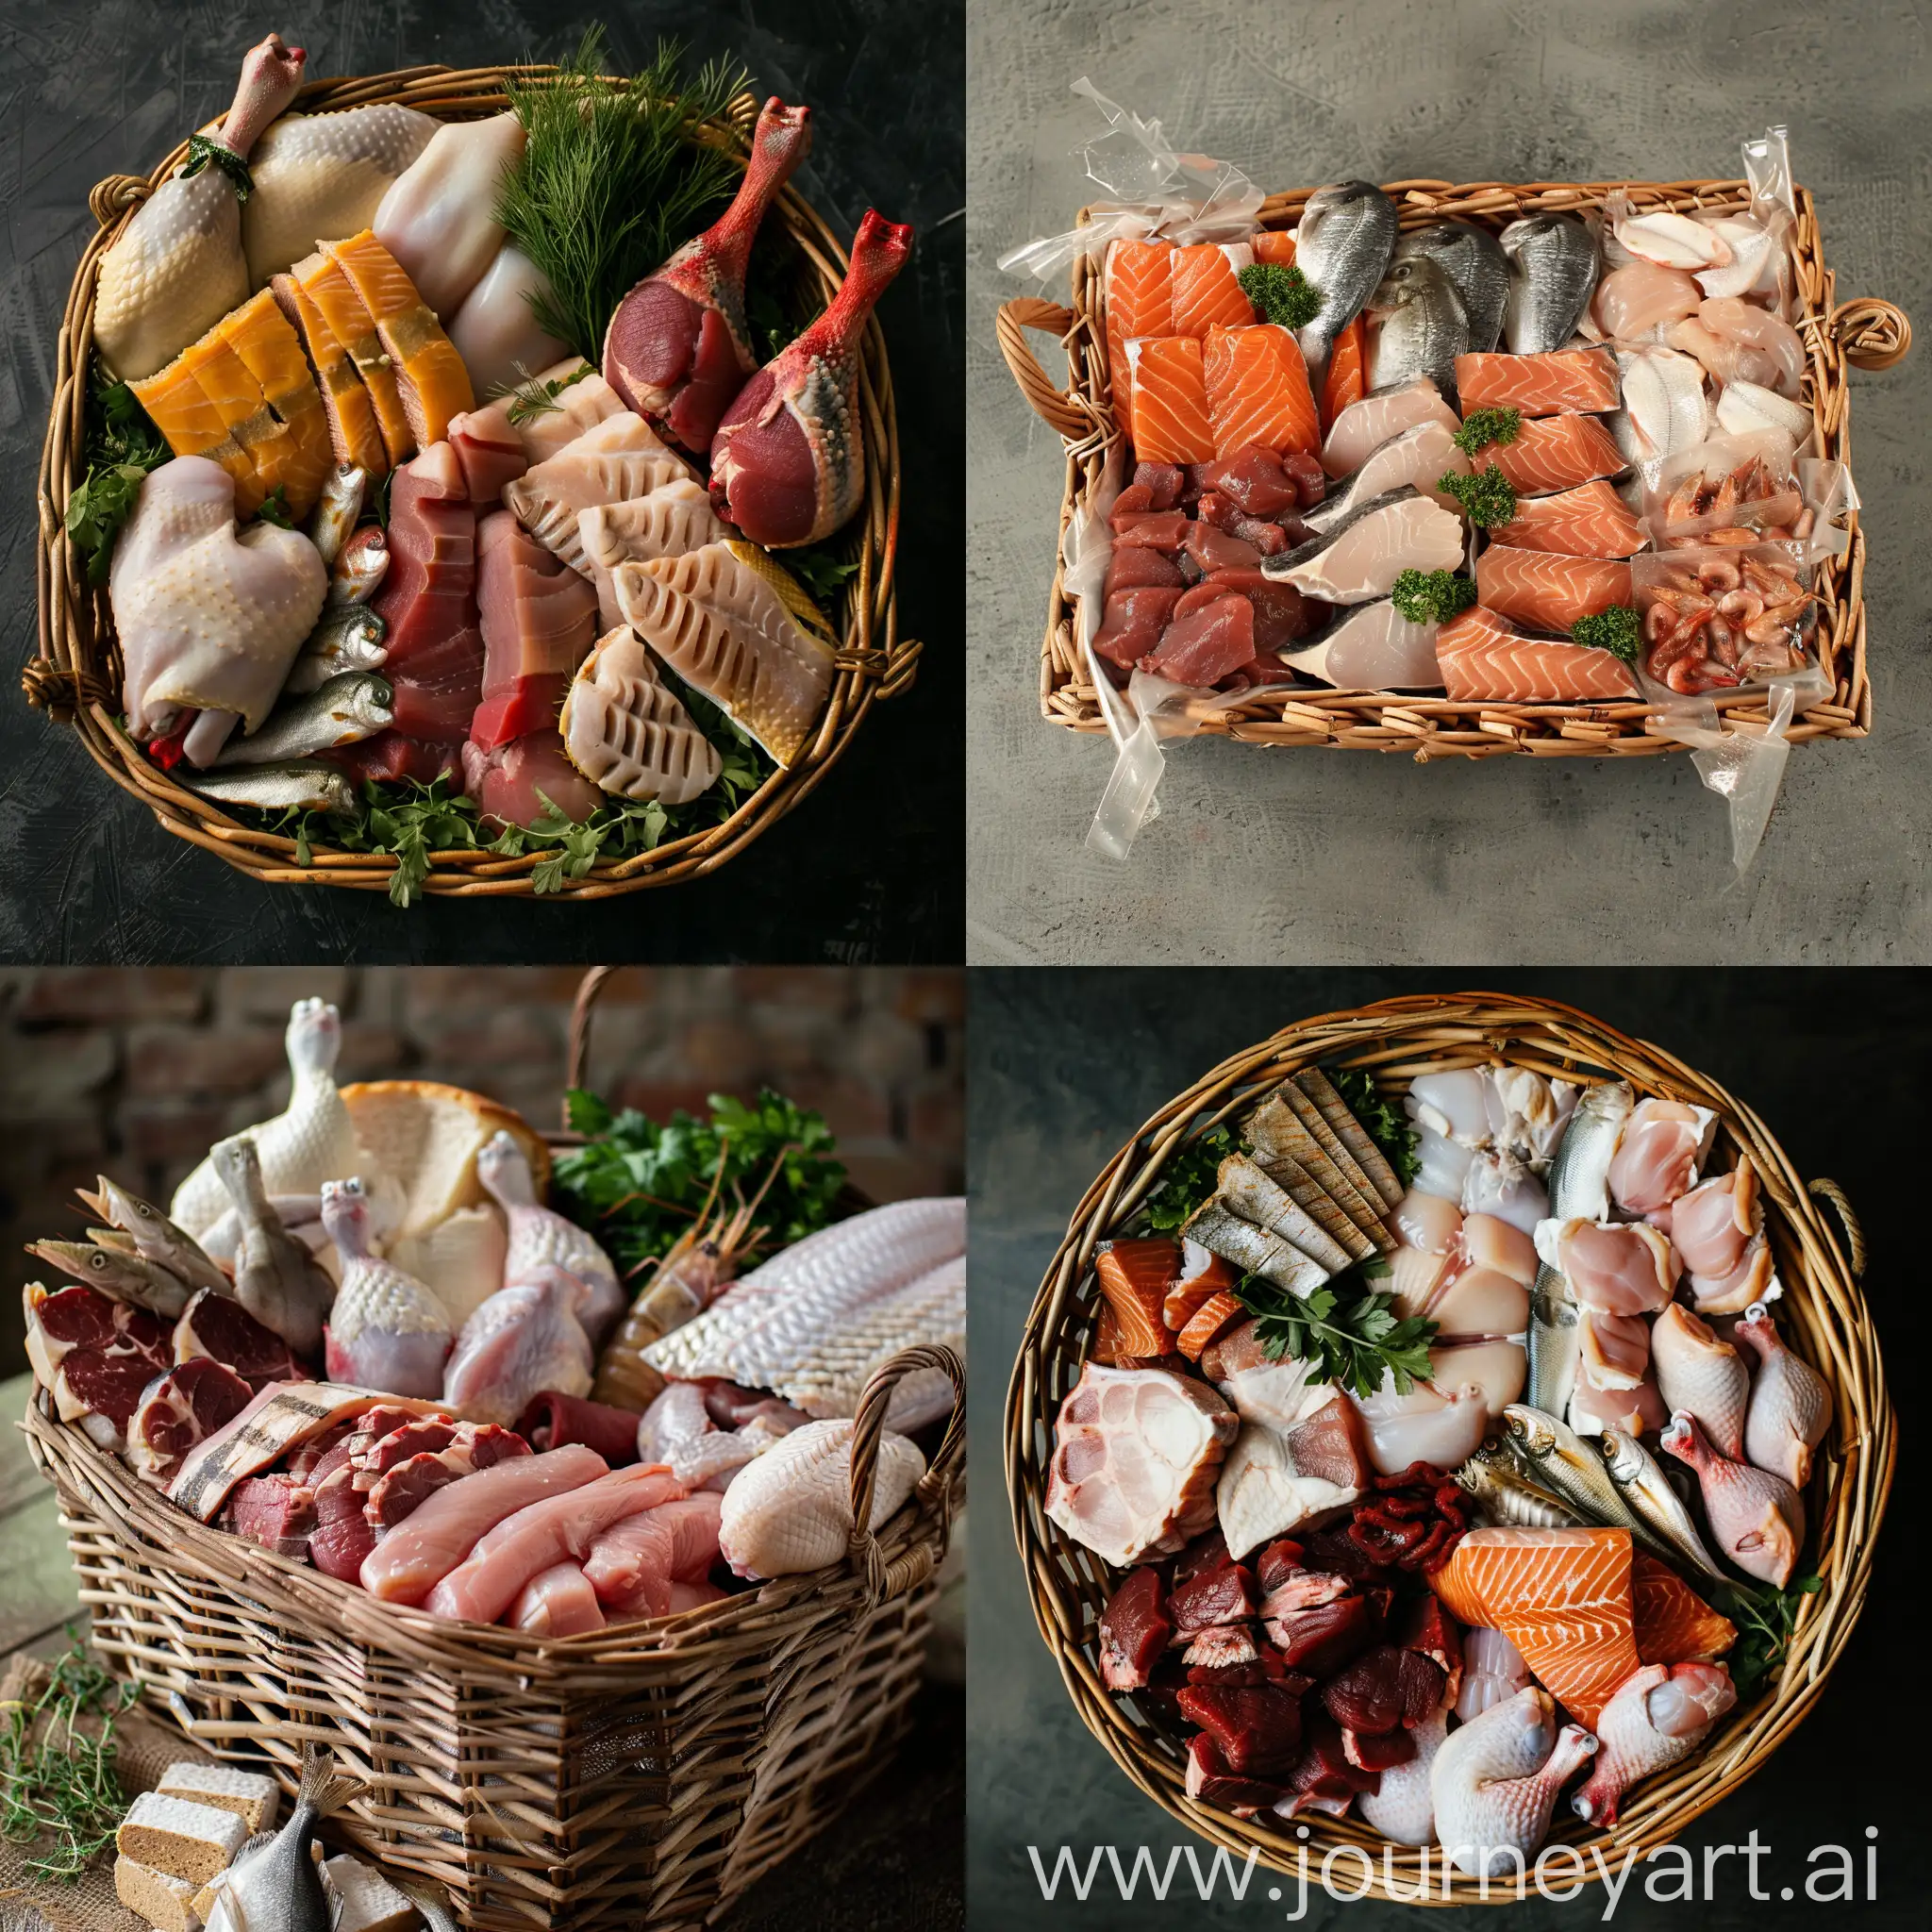 Photo of a basket full of poultry and 
fish products

